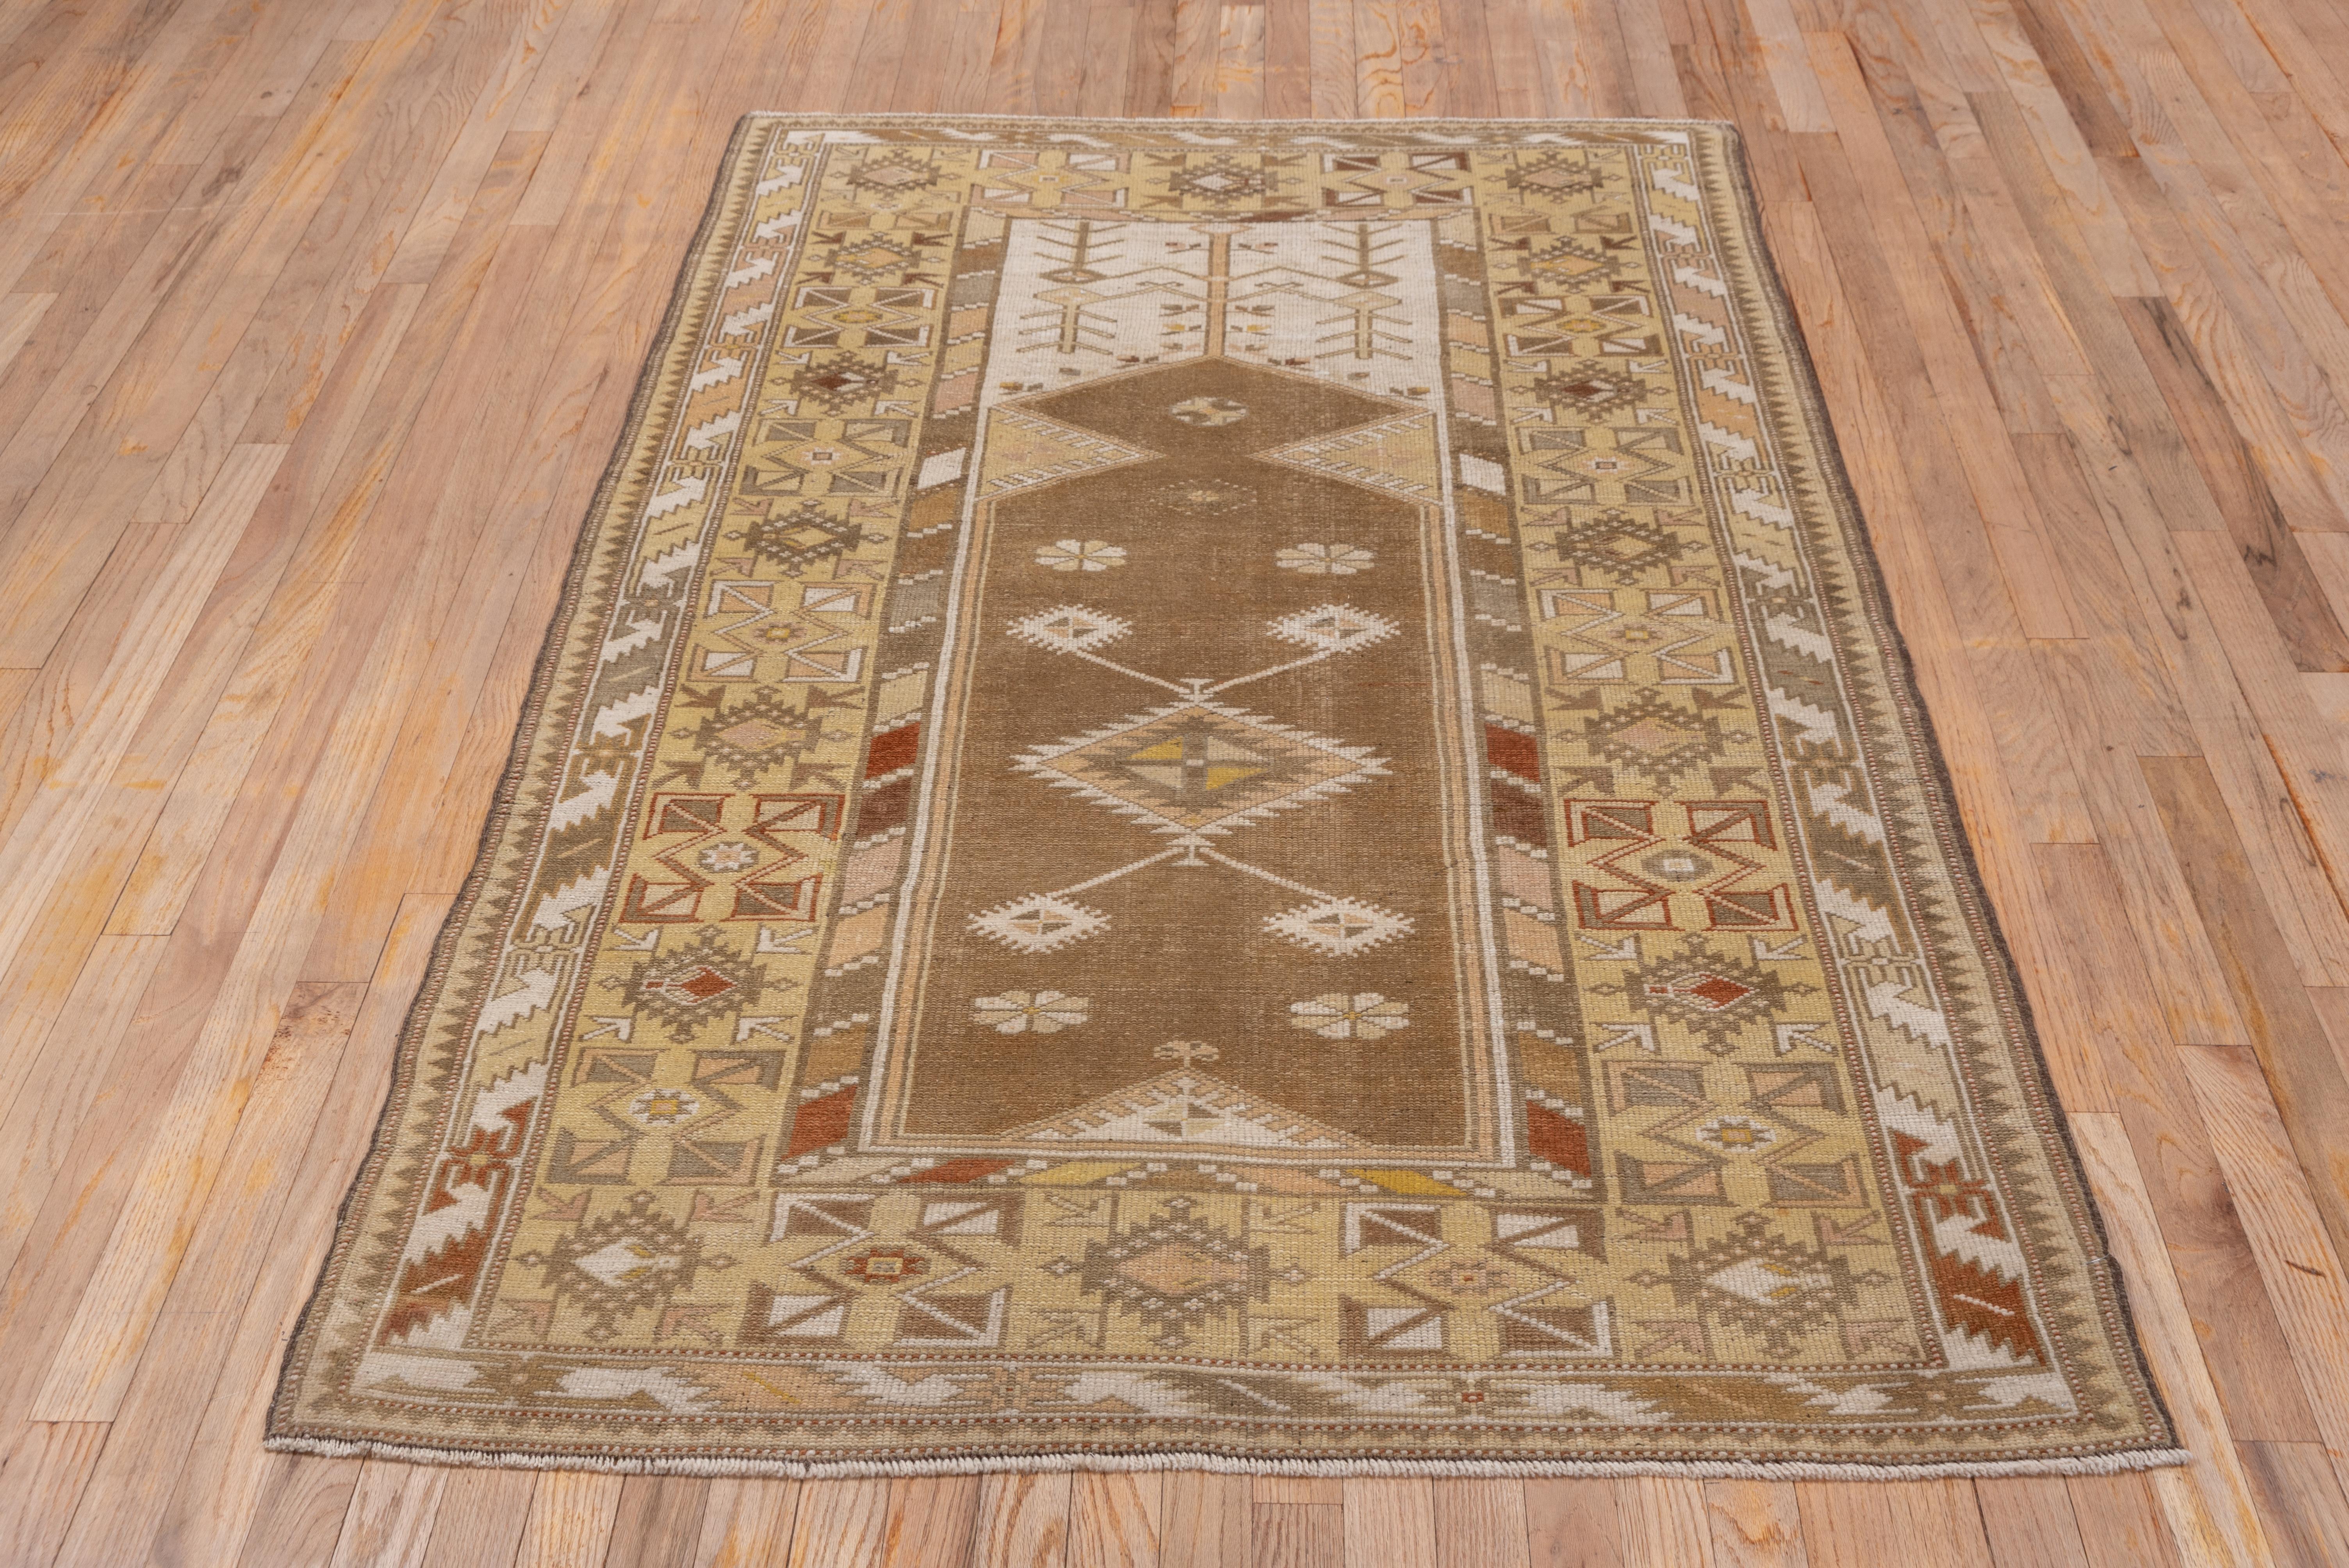 Vintage Turkish Melas Prayer Rug, circa 1950s In Good Condition For Sale In New York, NY